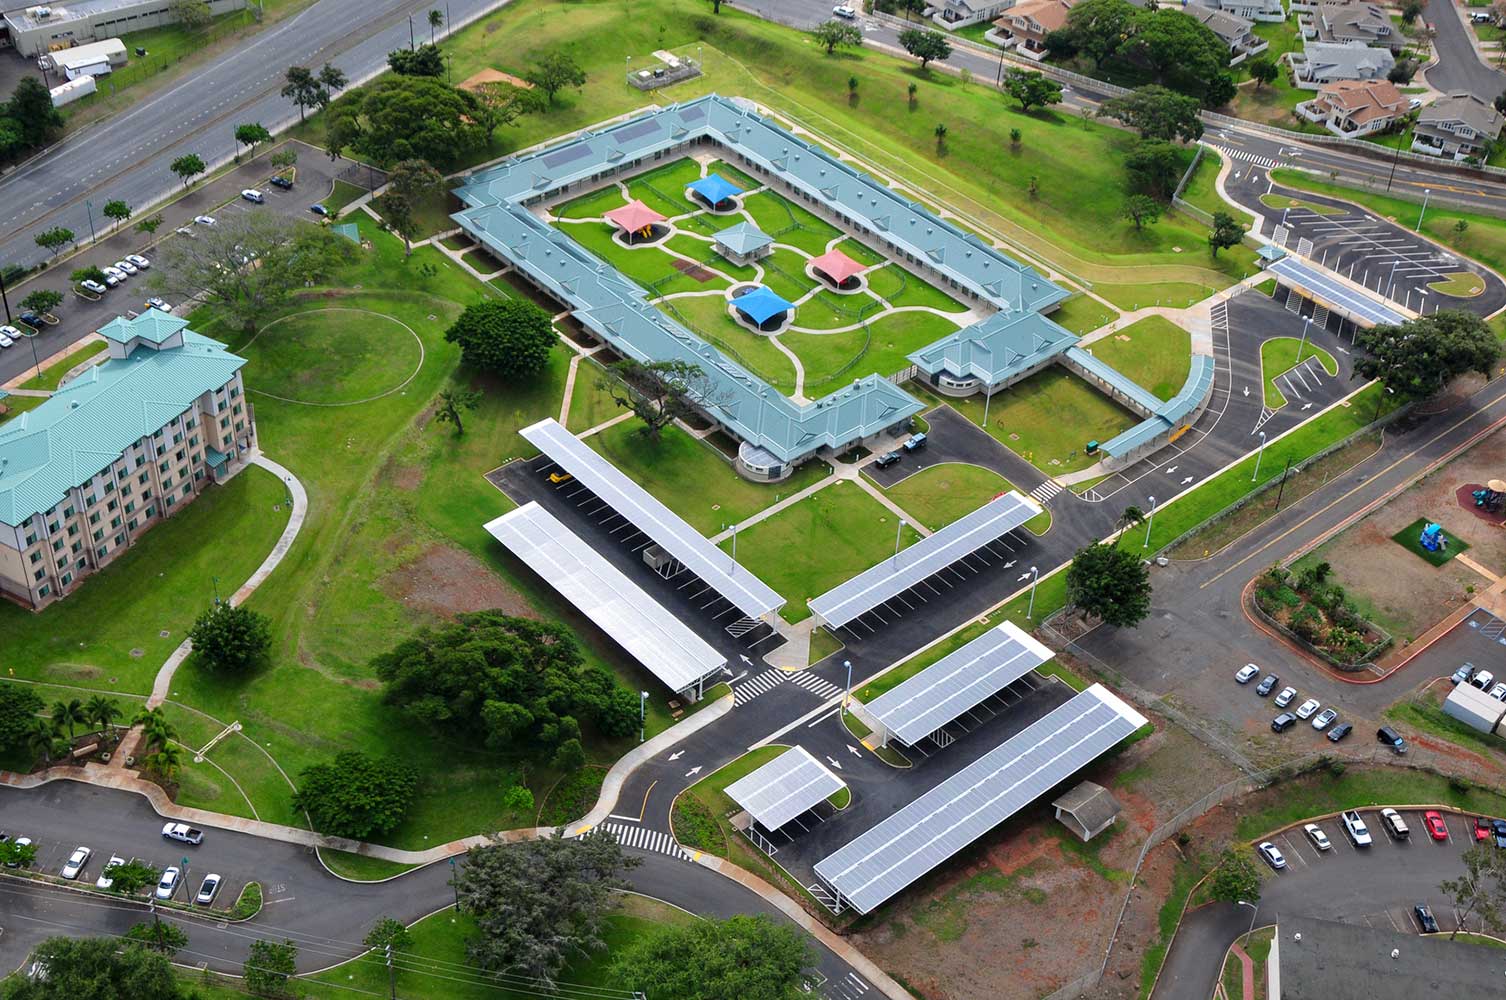 Sky view of child dev center with surrounding green landscape